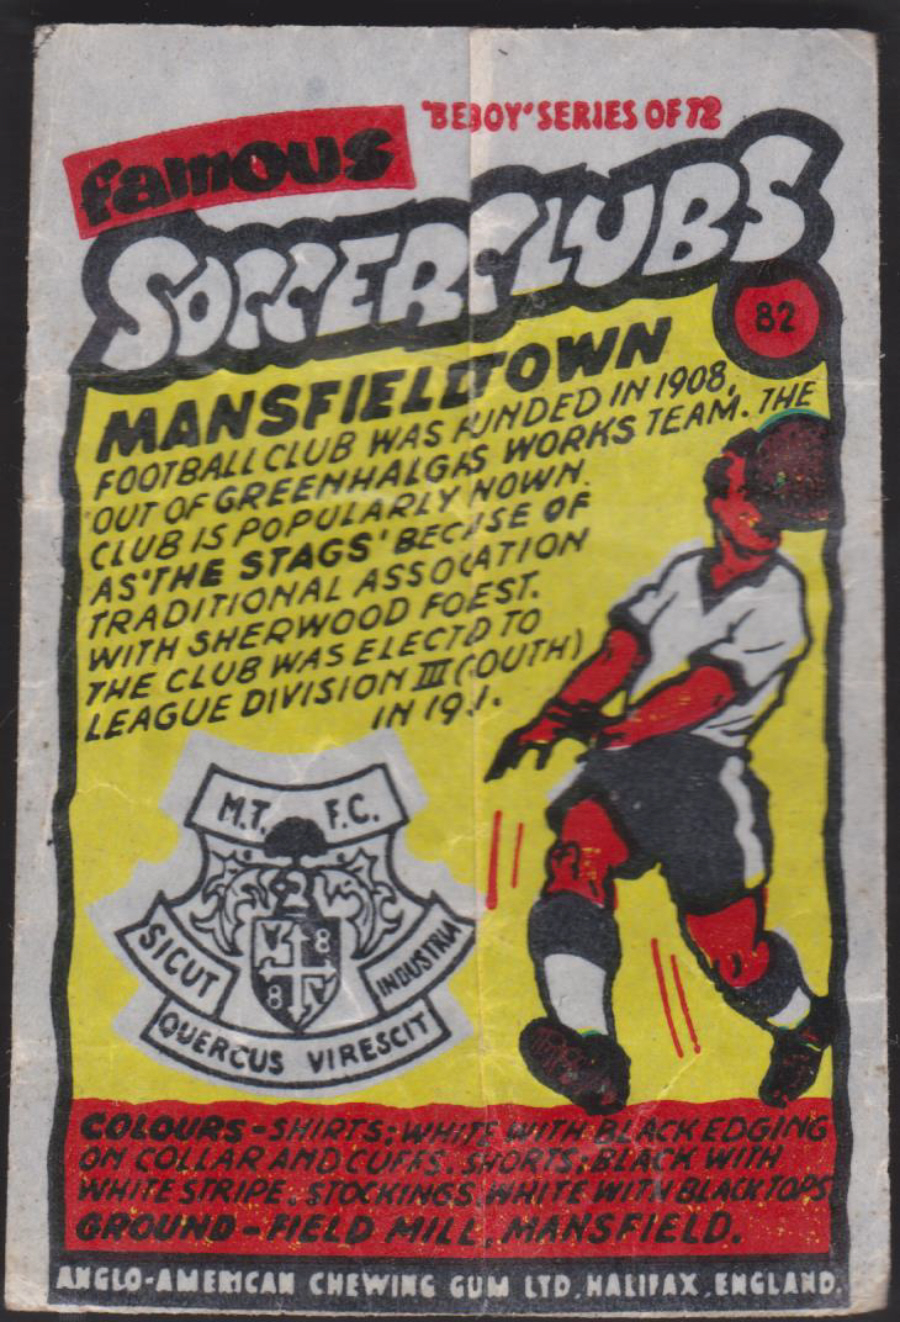 Anglo-American-Chewing-Gum-Wax-Wrapper-Famous-Soccer-Clubs-No-82 - Mansfield Town